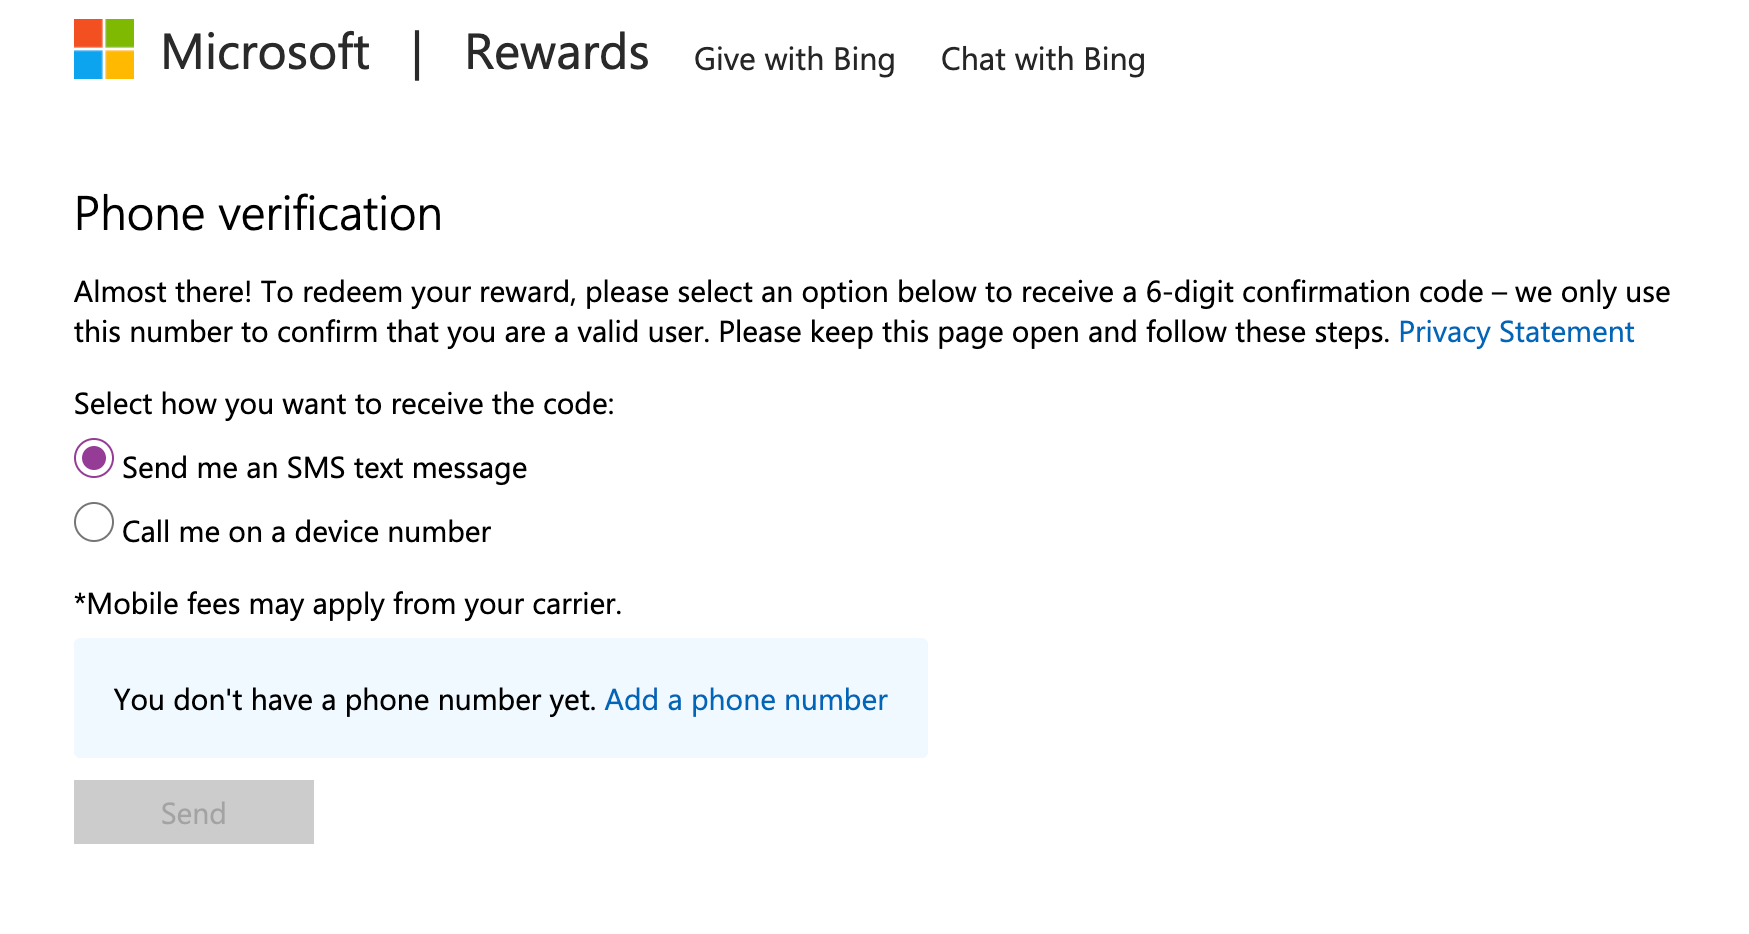 Does anyone know how i can add an alias phone number to my account in order to Redeem Rewards? [​IMG]